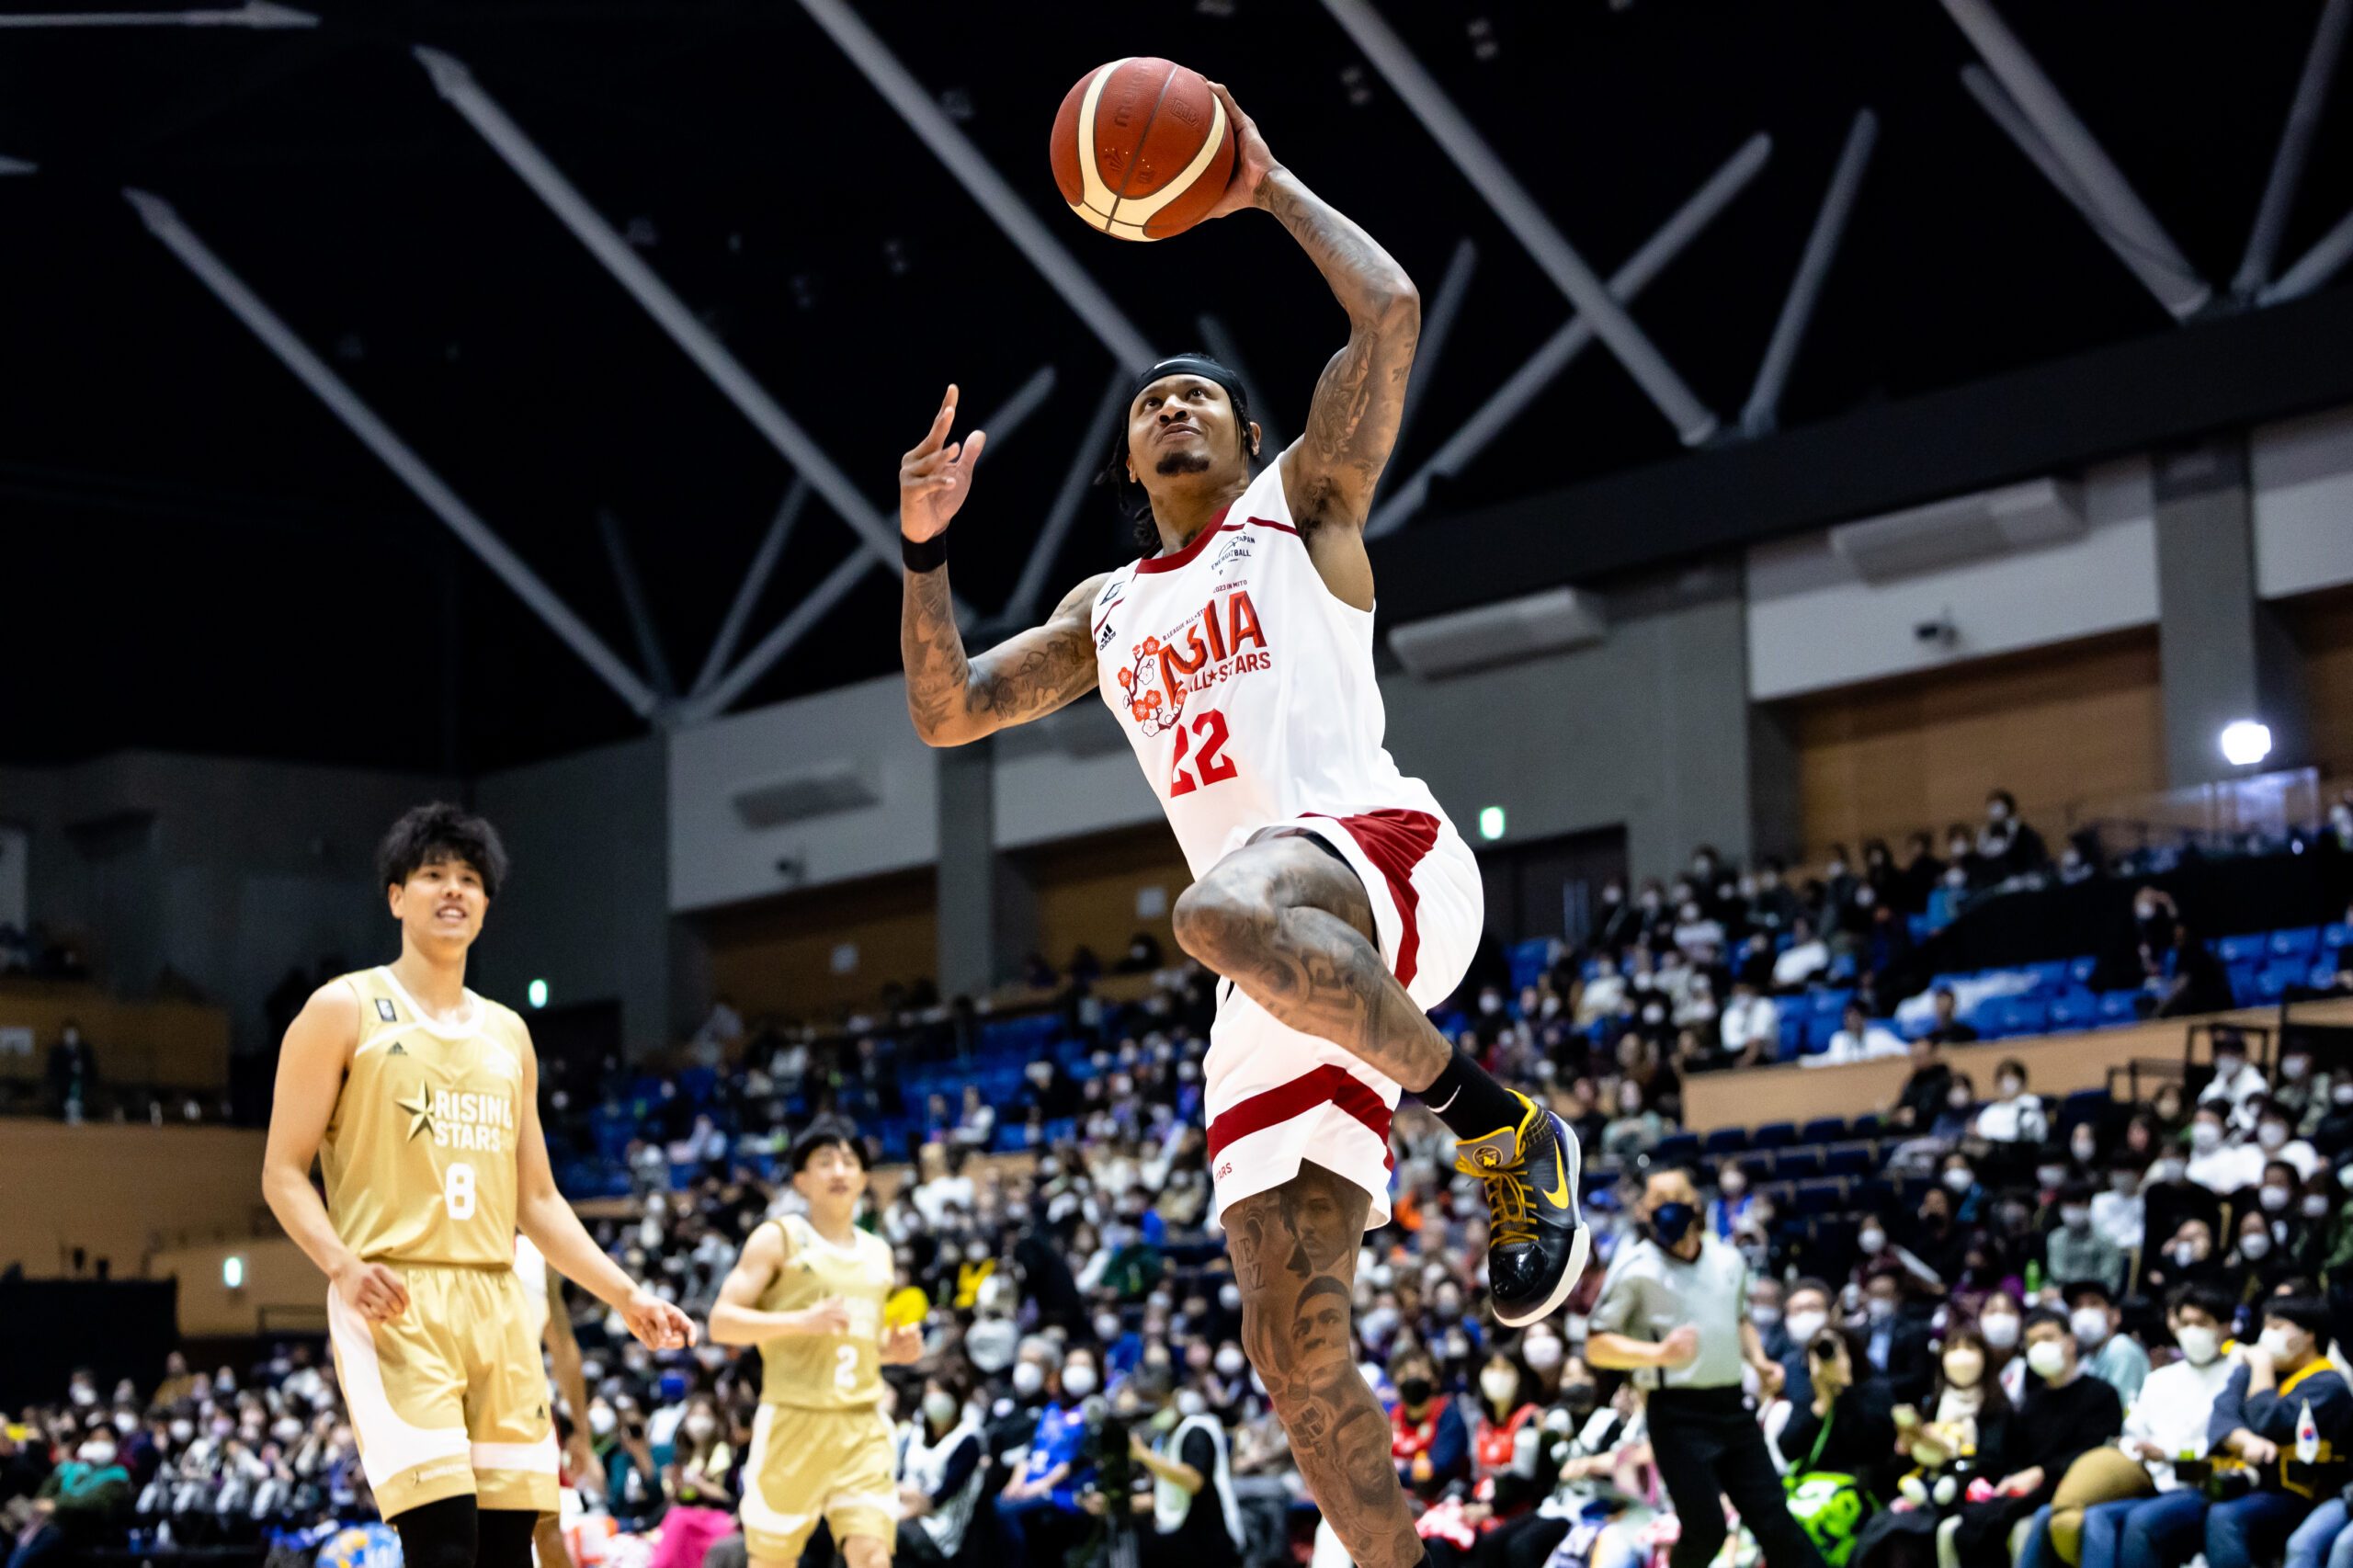 Japan All-Stars hit back with big win